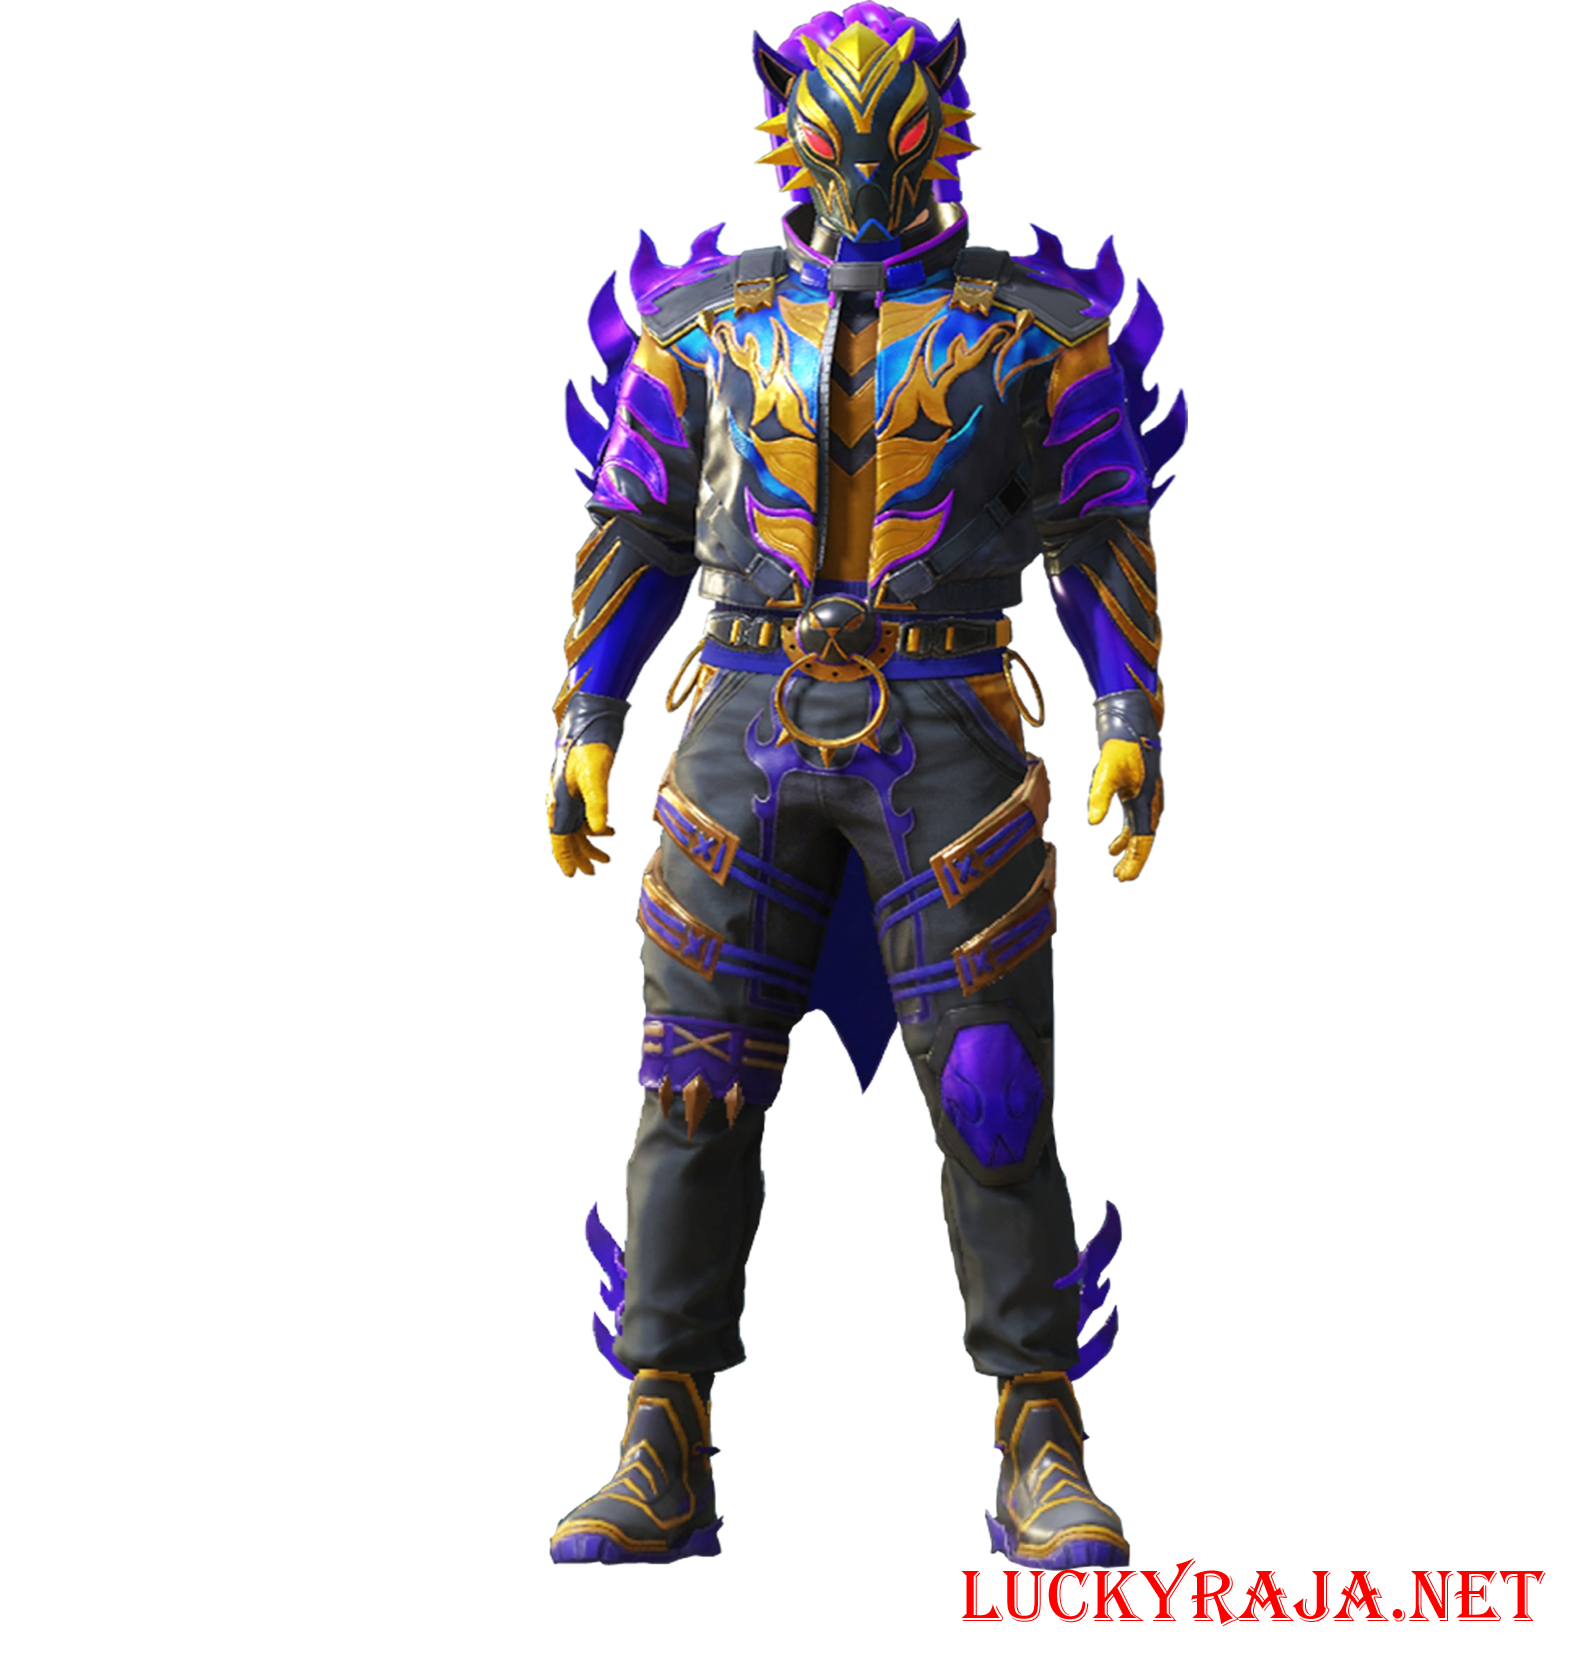 Twilight Warden ,Twilight Warden images,Twilight Warden pubg mobile,Twilight Warden outfit,pubg mobile outfits,animation,cartoon images